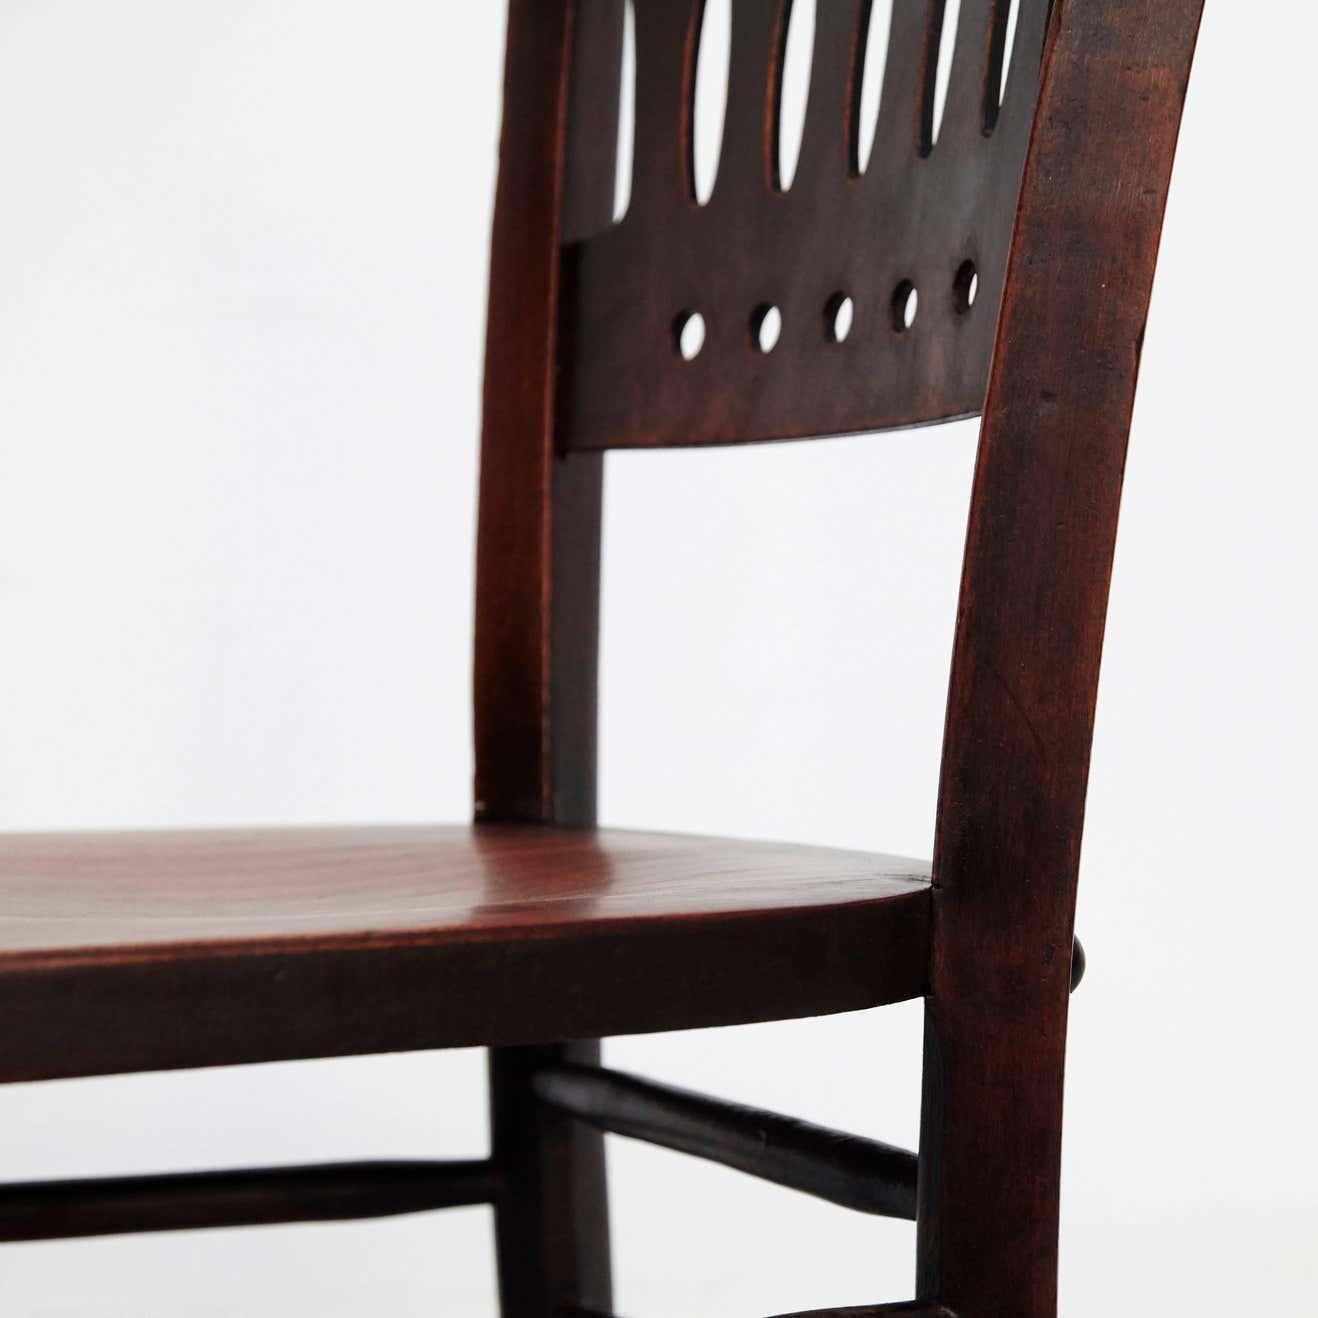 Set of 12 bistro chairs of the Luterma manufactured in Estonia, circa 1900.

In original condition, with minor wear consistent with age and use, preserving a beautiful patina. 


Chairs of the old Luterma Estonian manufactory founded in 1896 in